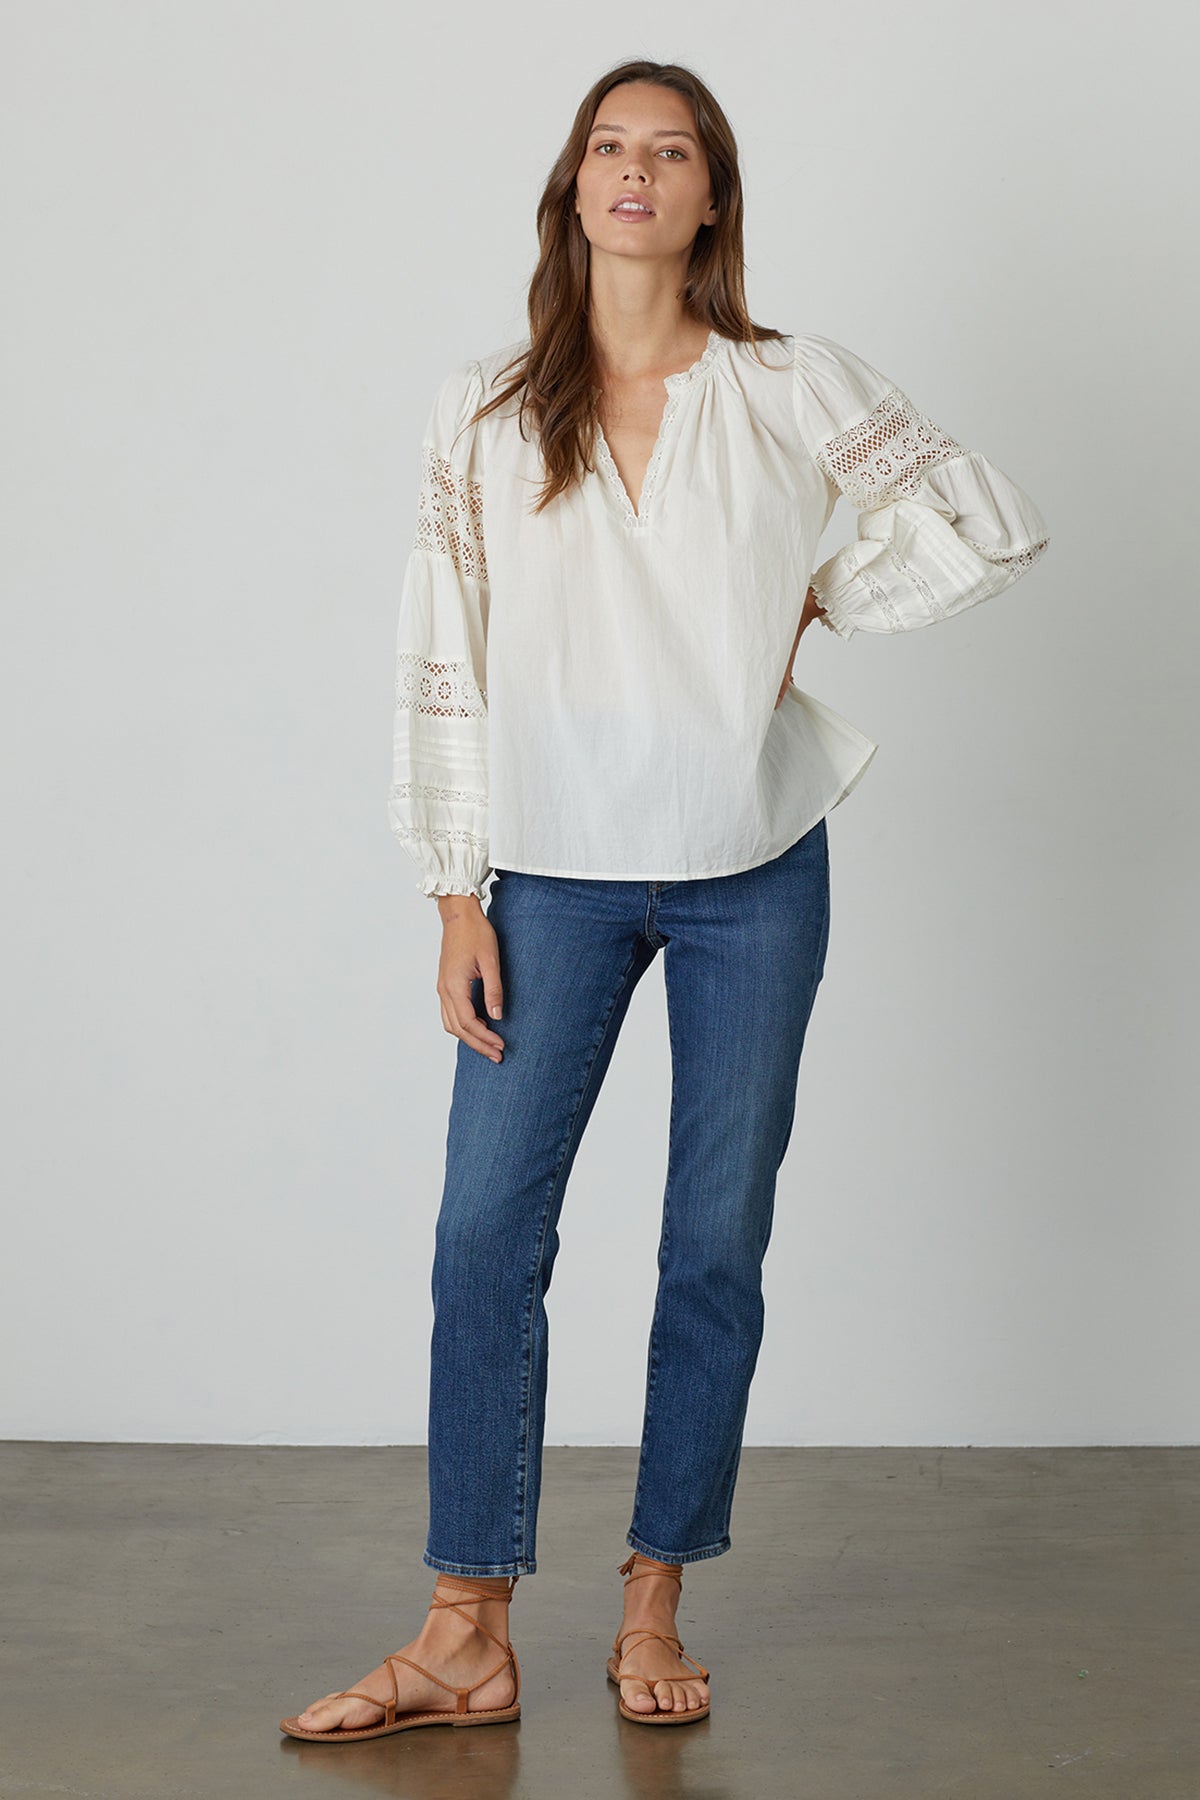   The model is wearing Velvet by Graham & Spencer jeans and a TAYLER COTTON LACE BOHO TOP. 